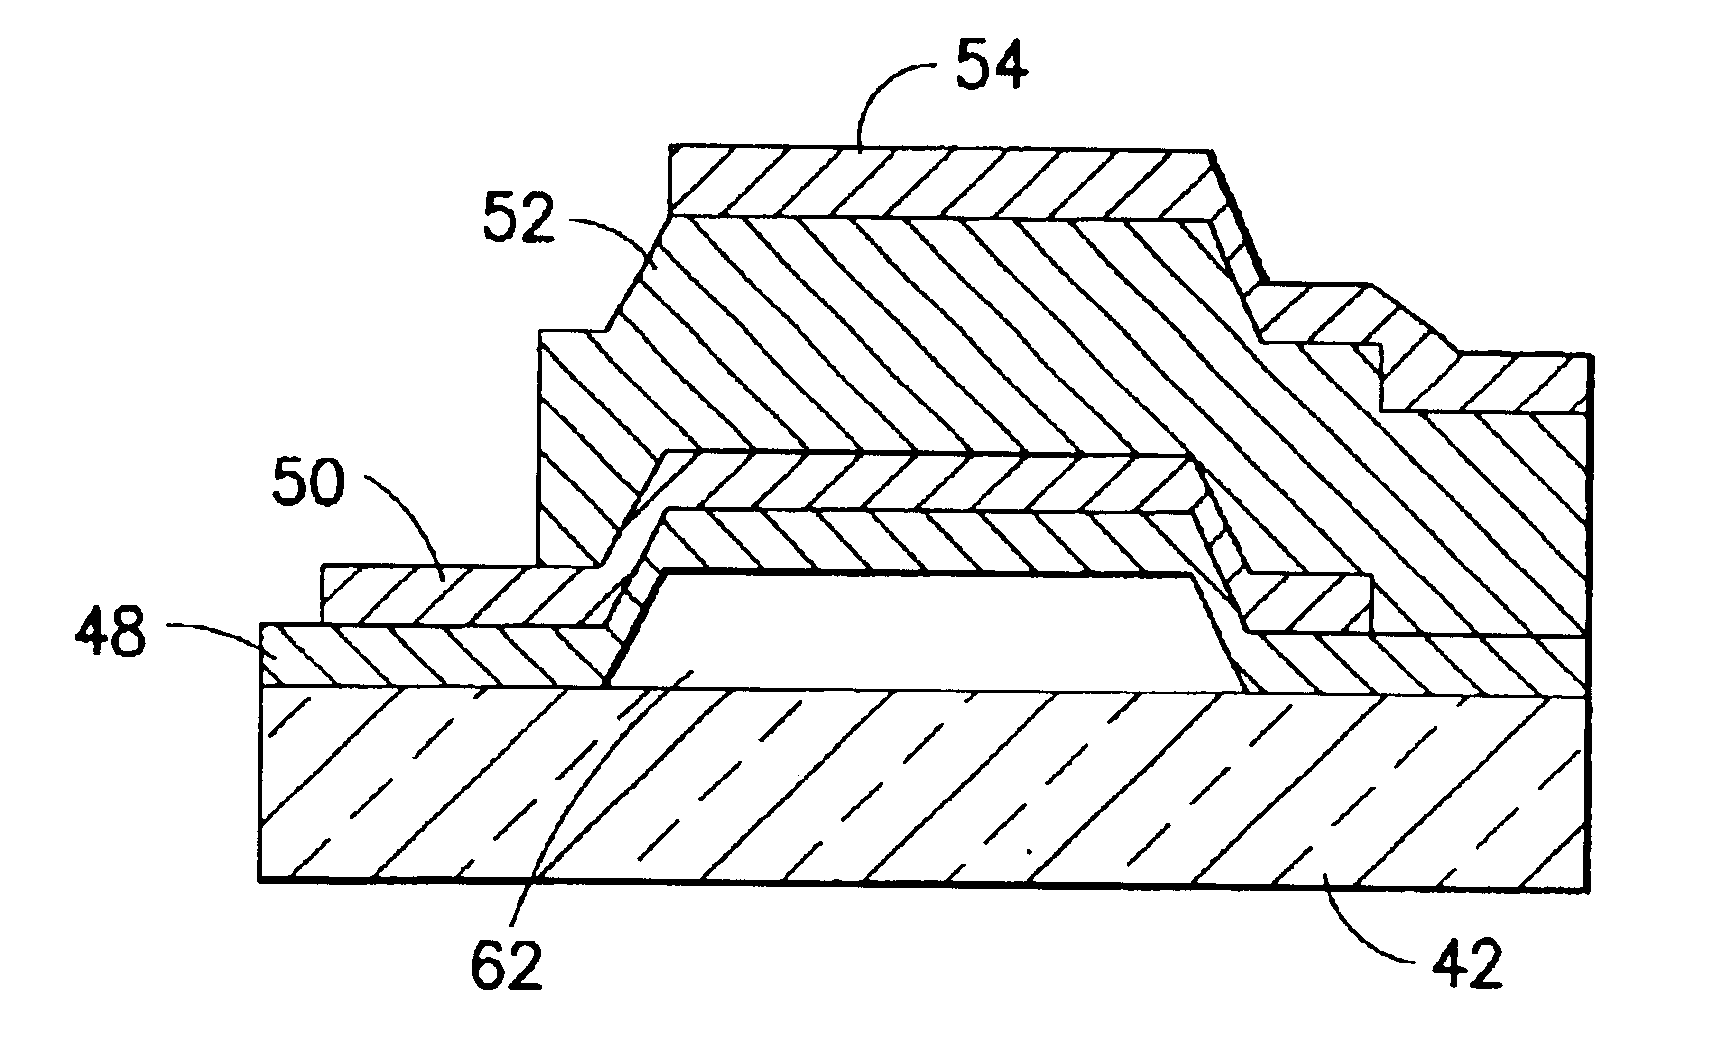 Method for fabricating a thin film bulk acoustic wave resonator (FBAR) on a glass substrate